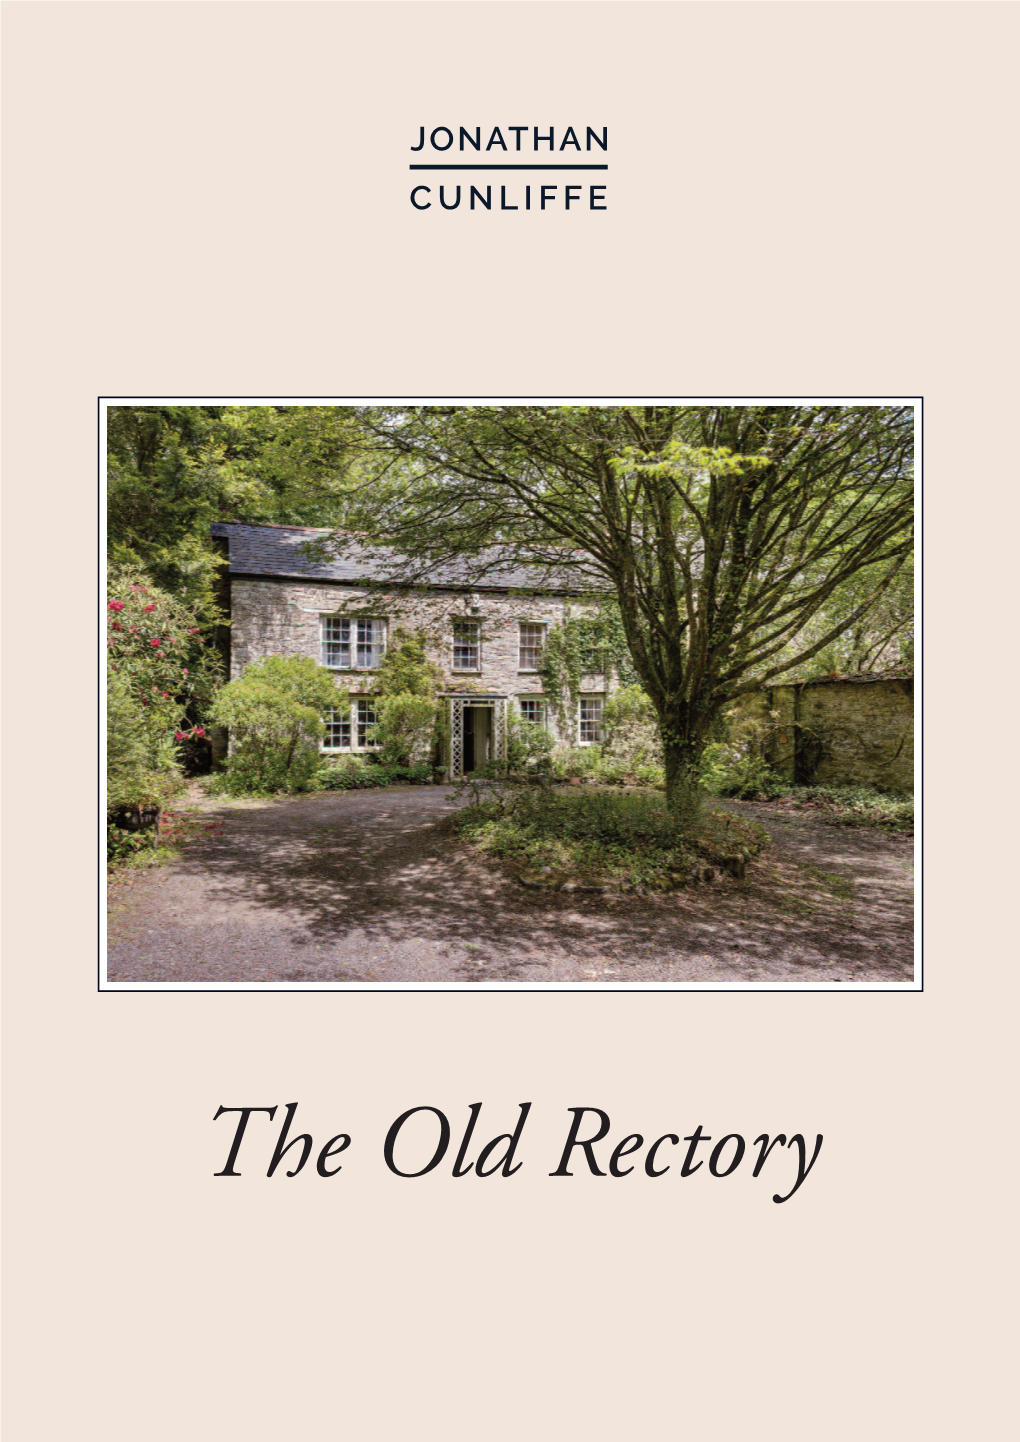 The Old Rectory the Old Rectory, St Allen, Truro TR4 9QX